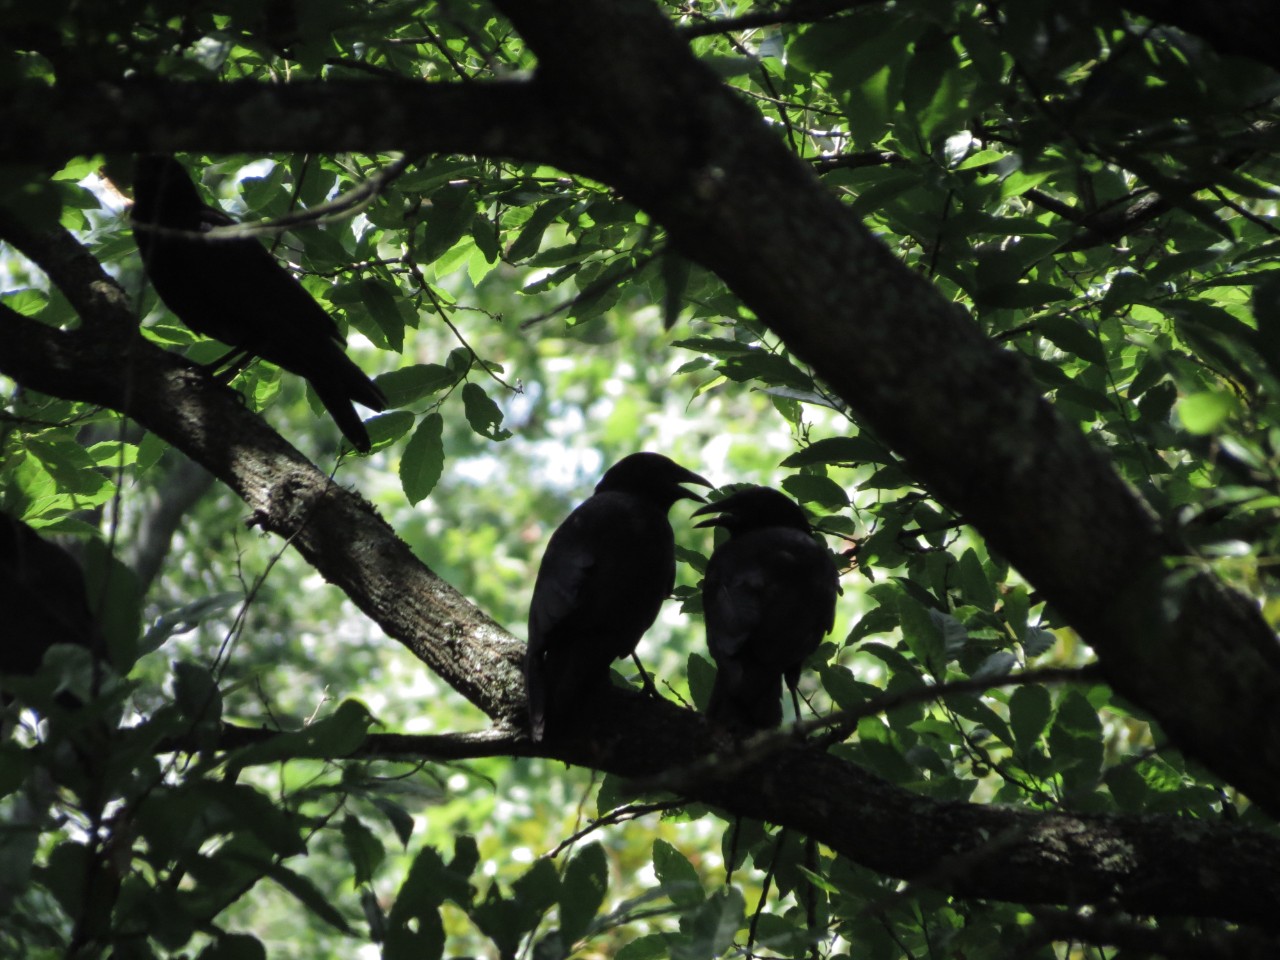 A high-contrast photo shows two ravens in silhouette, perched on a large branch, surrounded by leaves. Another large branch is in the foreground. Another bird can just be seen further off in the upper left corner. The background shows bright, dappled sunlight.